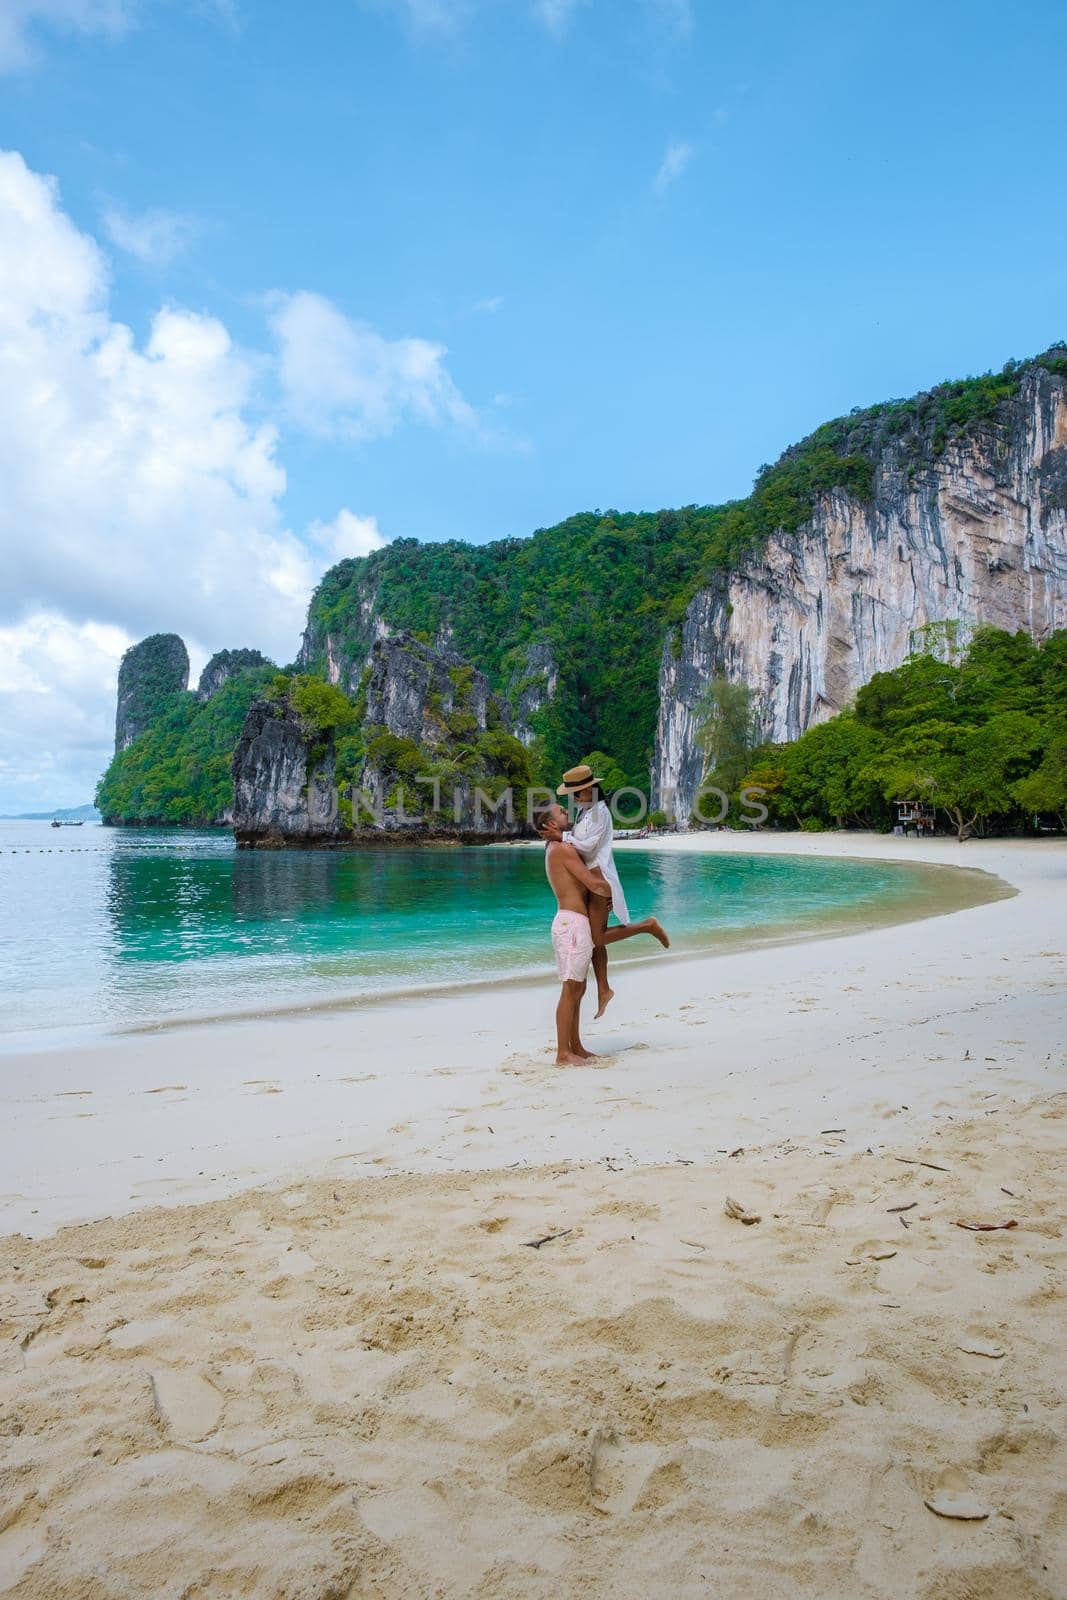 Koh Hong Island Krabi Thailand, couple of men and woman on the beach of Koh Hong, tropical white beach with Asian woman and European men by fokkebok